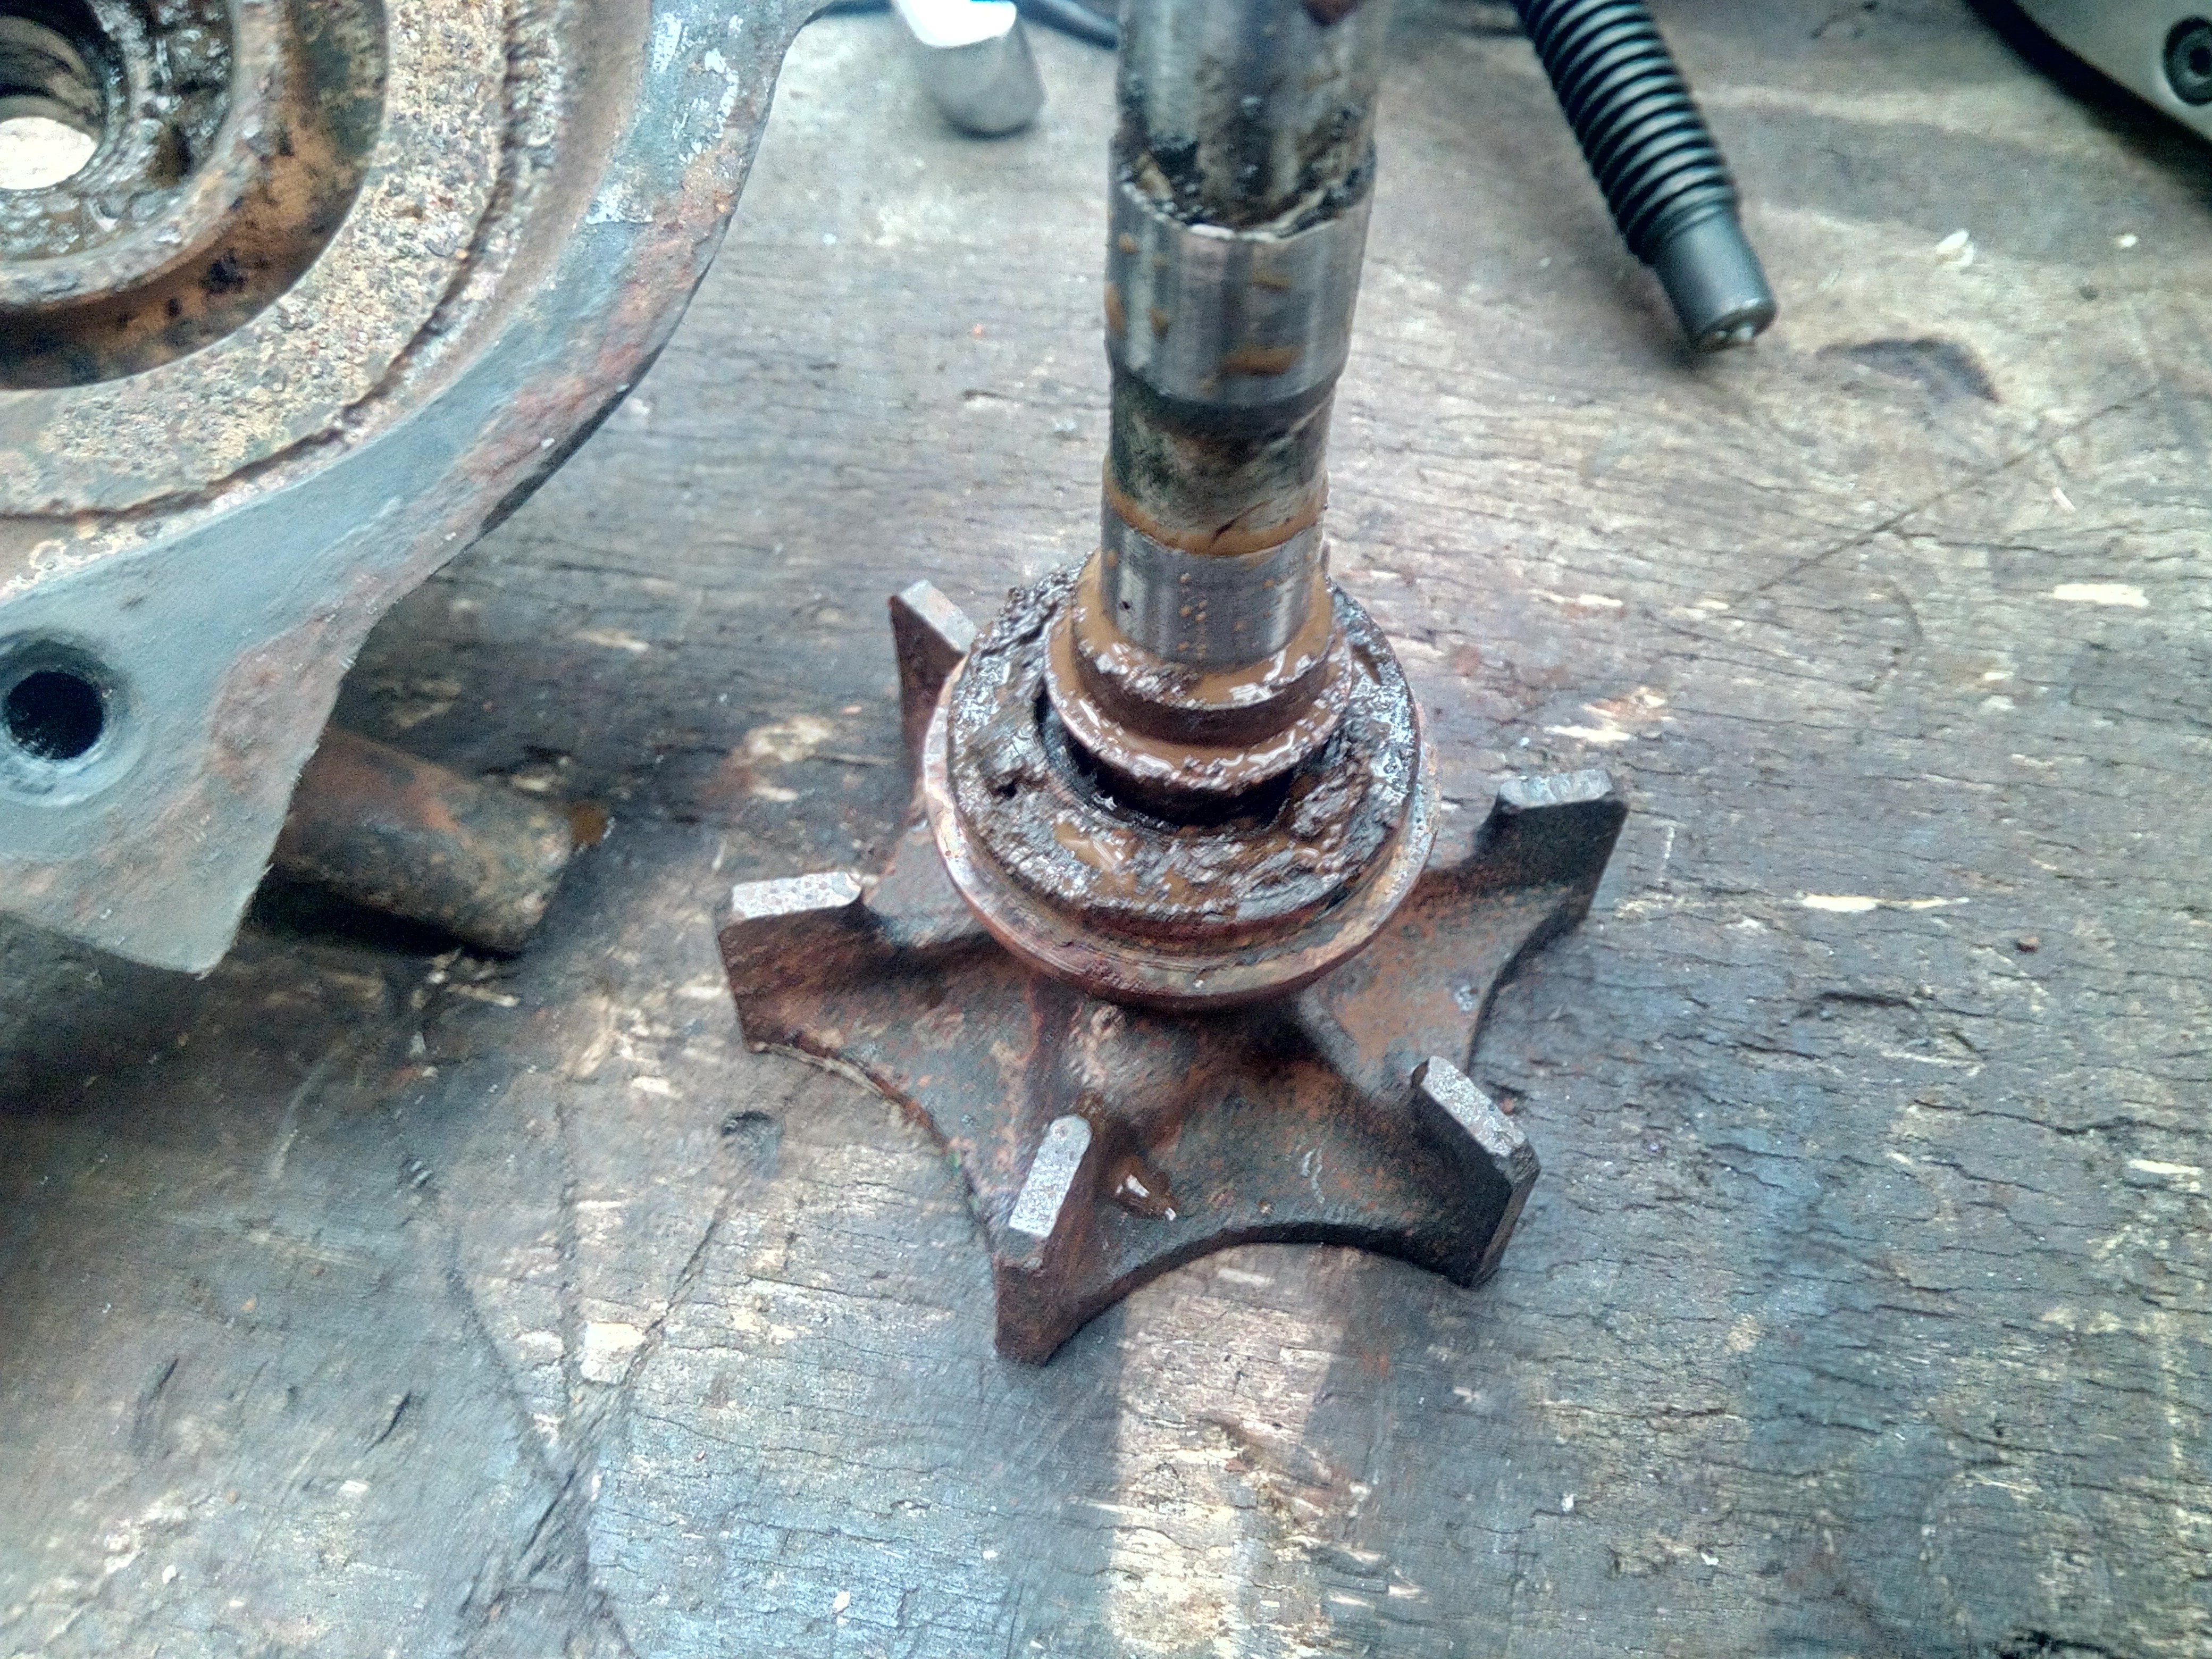 Photograph of the water pump's shaft and inner seal. The seals
are badly degraded, and the whole shaft is covered in muddy brown
water.